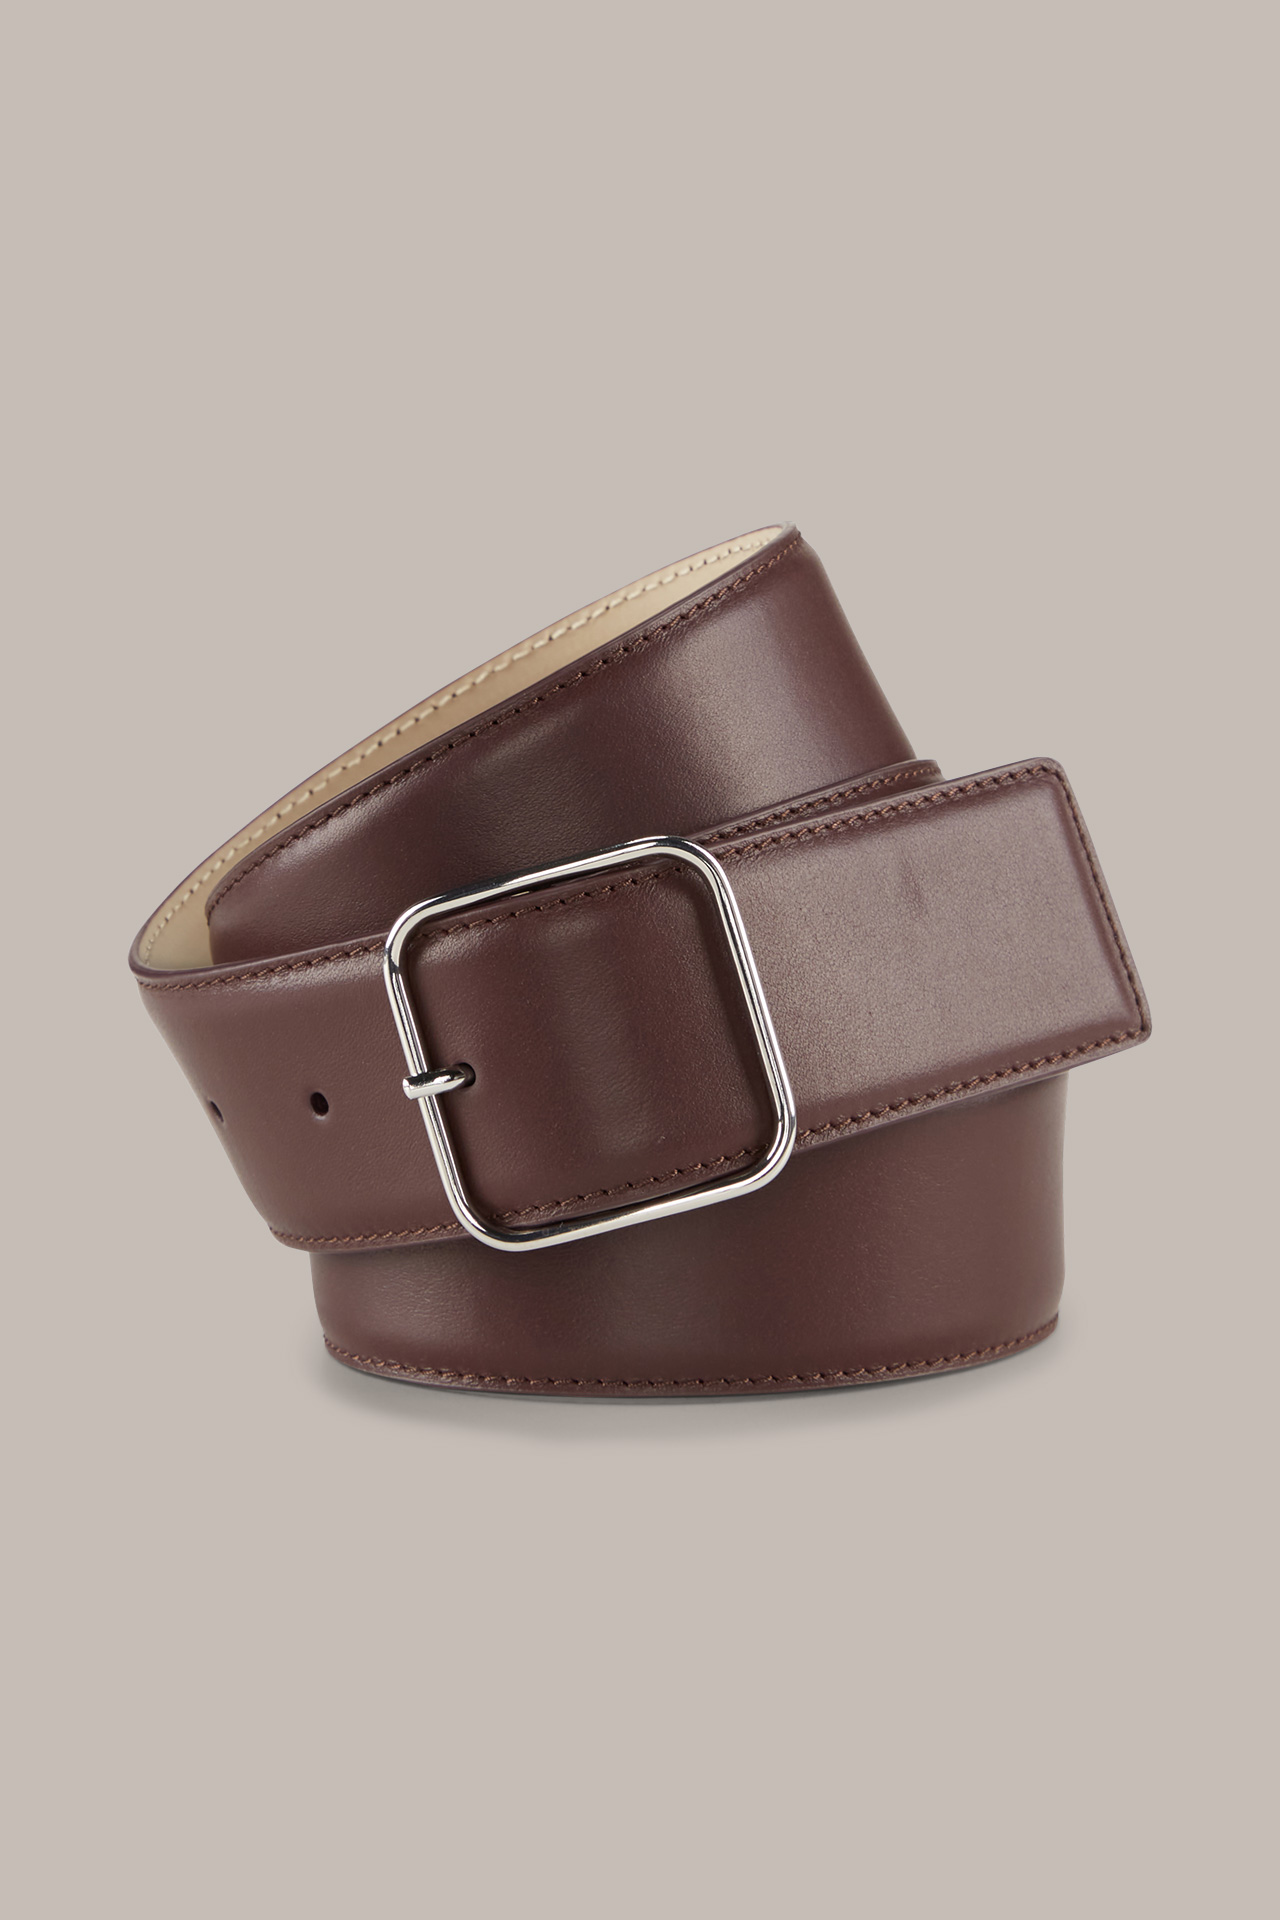 Nappa leather belt with detachable bag in reddish brown